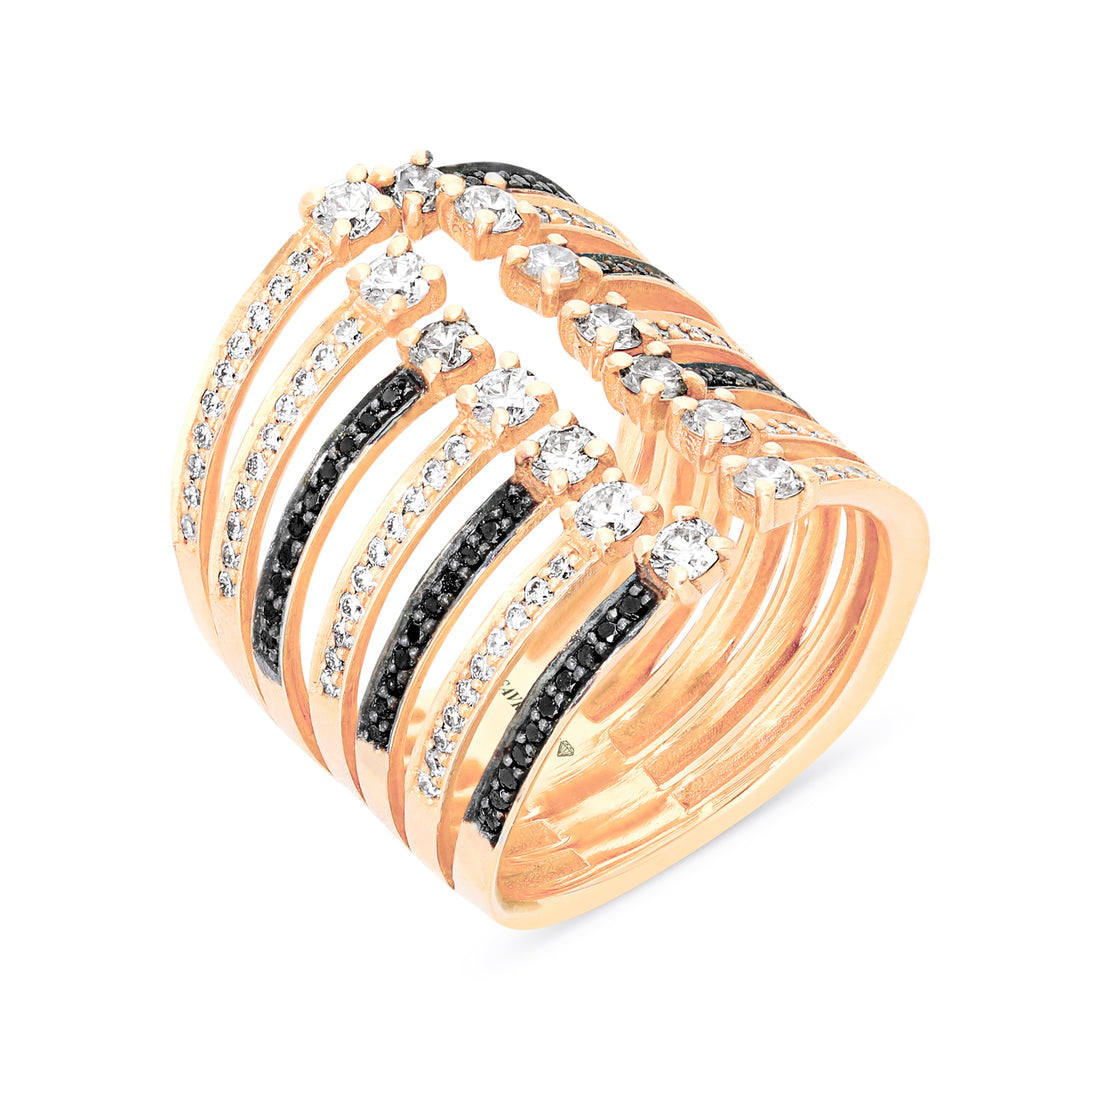 Multi Row Pave Lined Black and White Diamond Elongated Band Ring